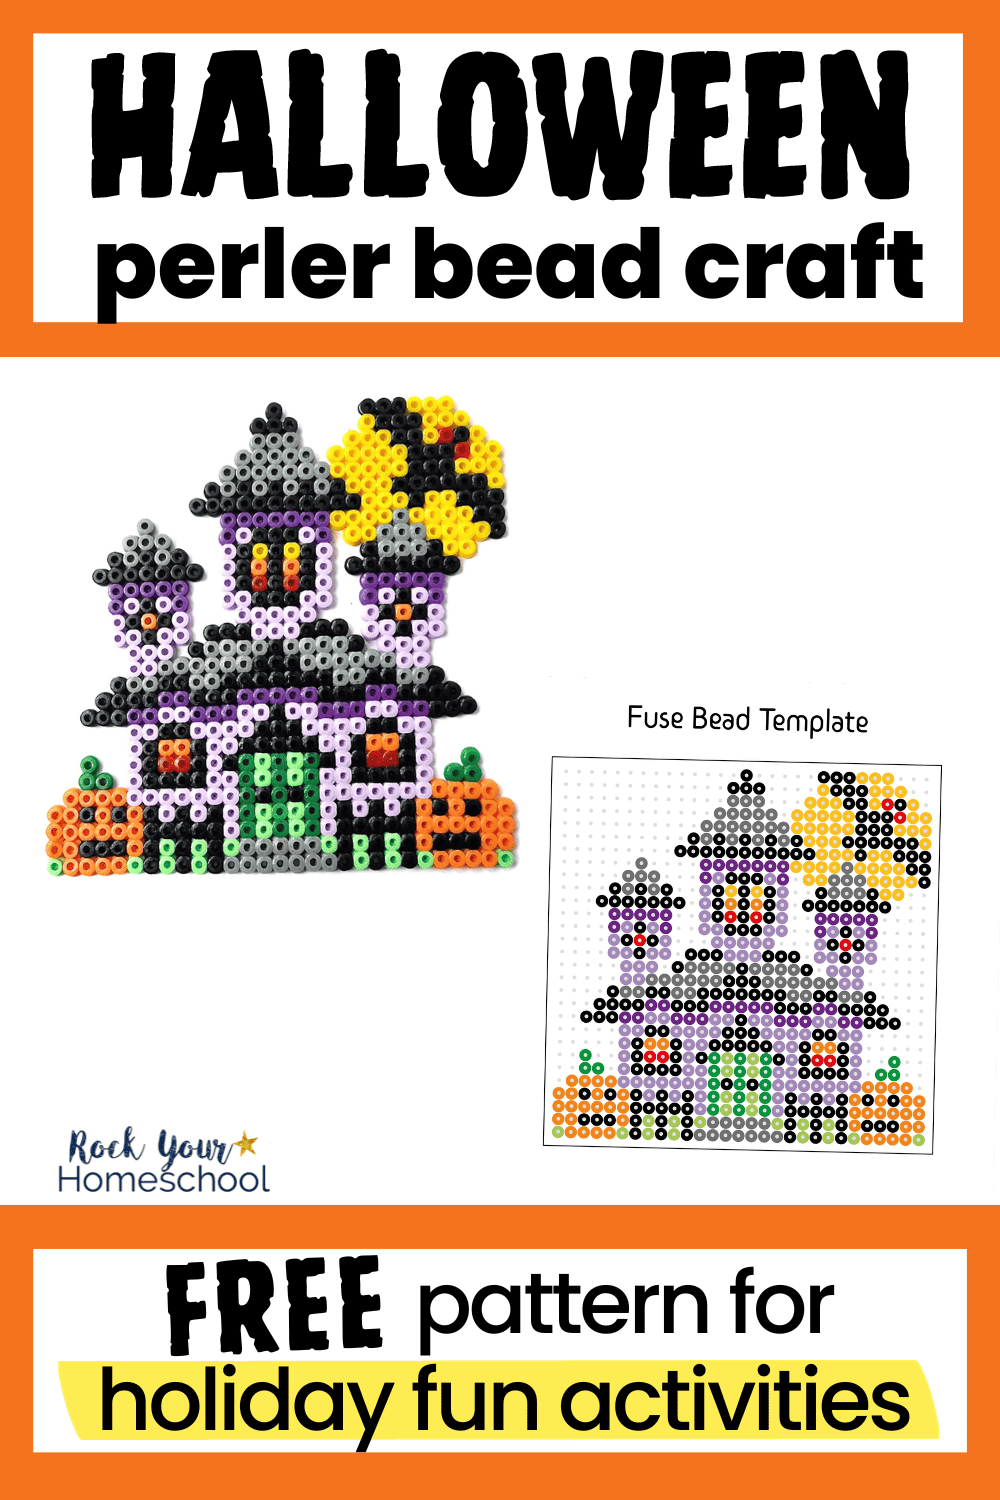 Halloween Perler Bead Patterns: How to Make a Fun Haunted House (Free)